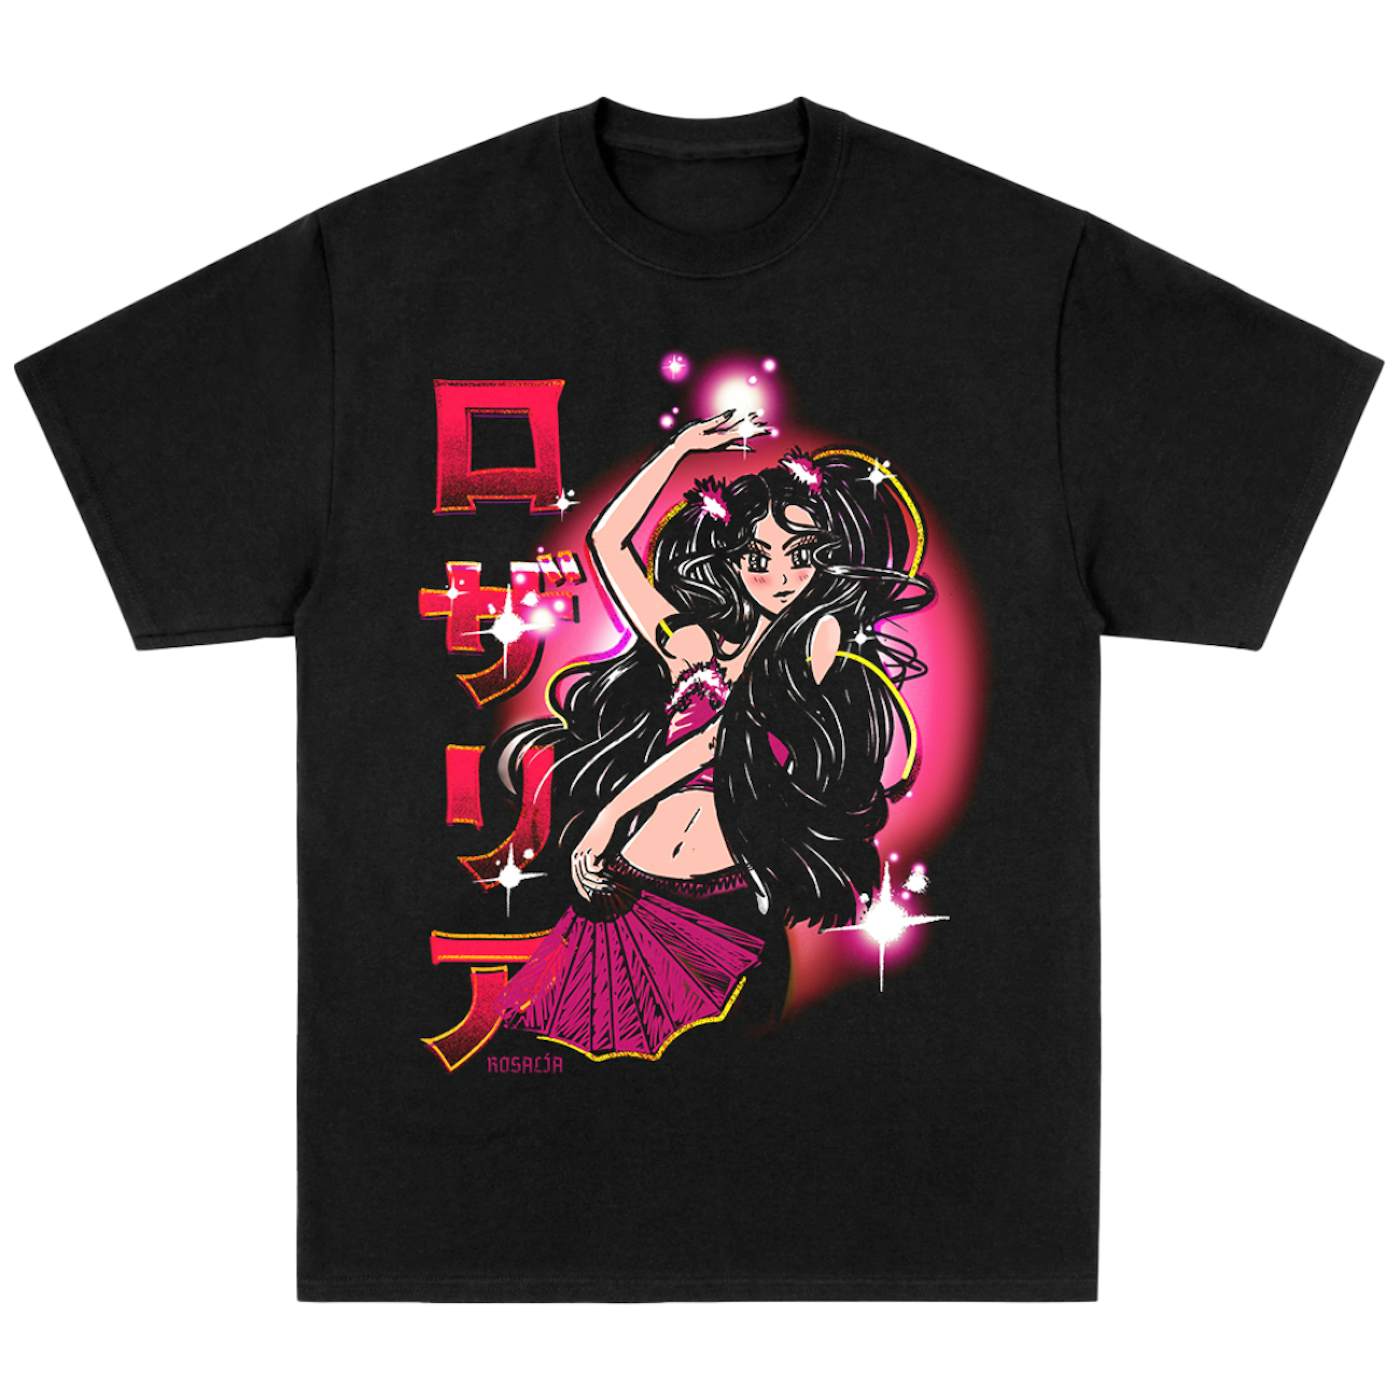 ROSALÍA Pink Character Tee